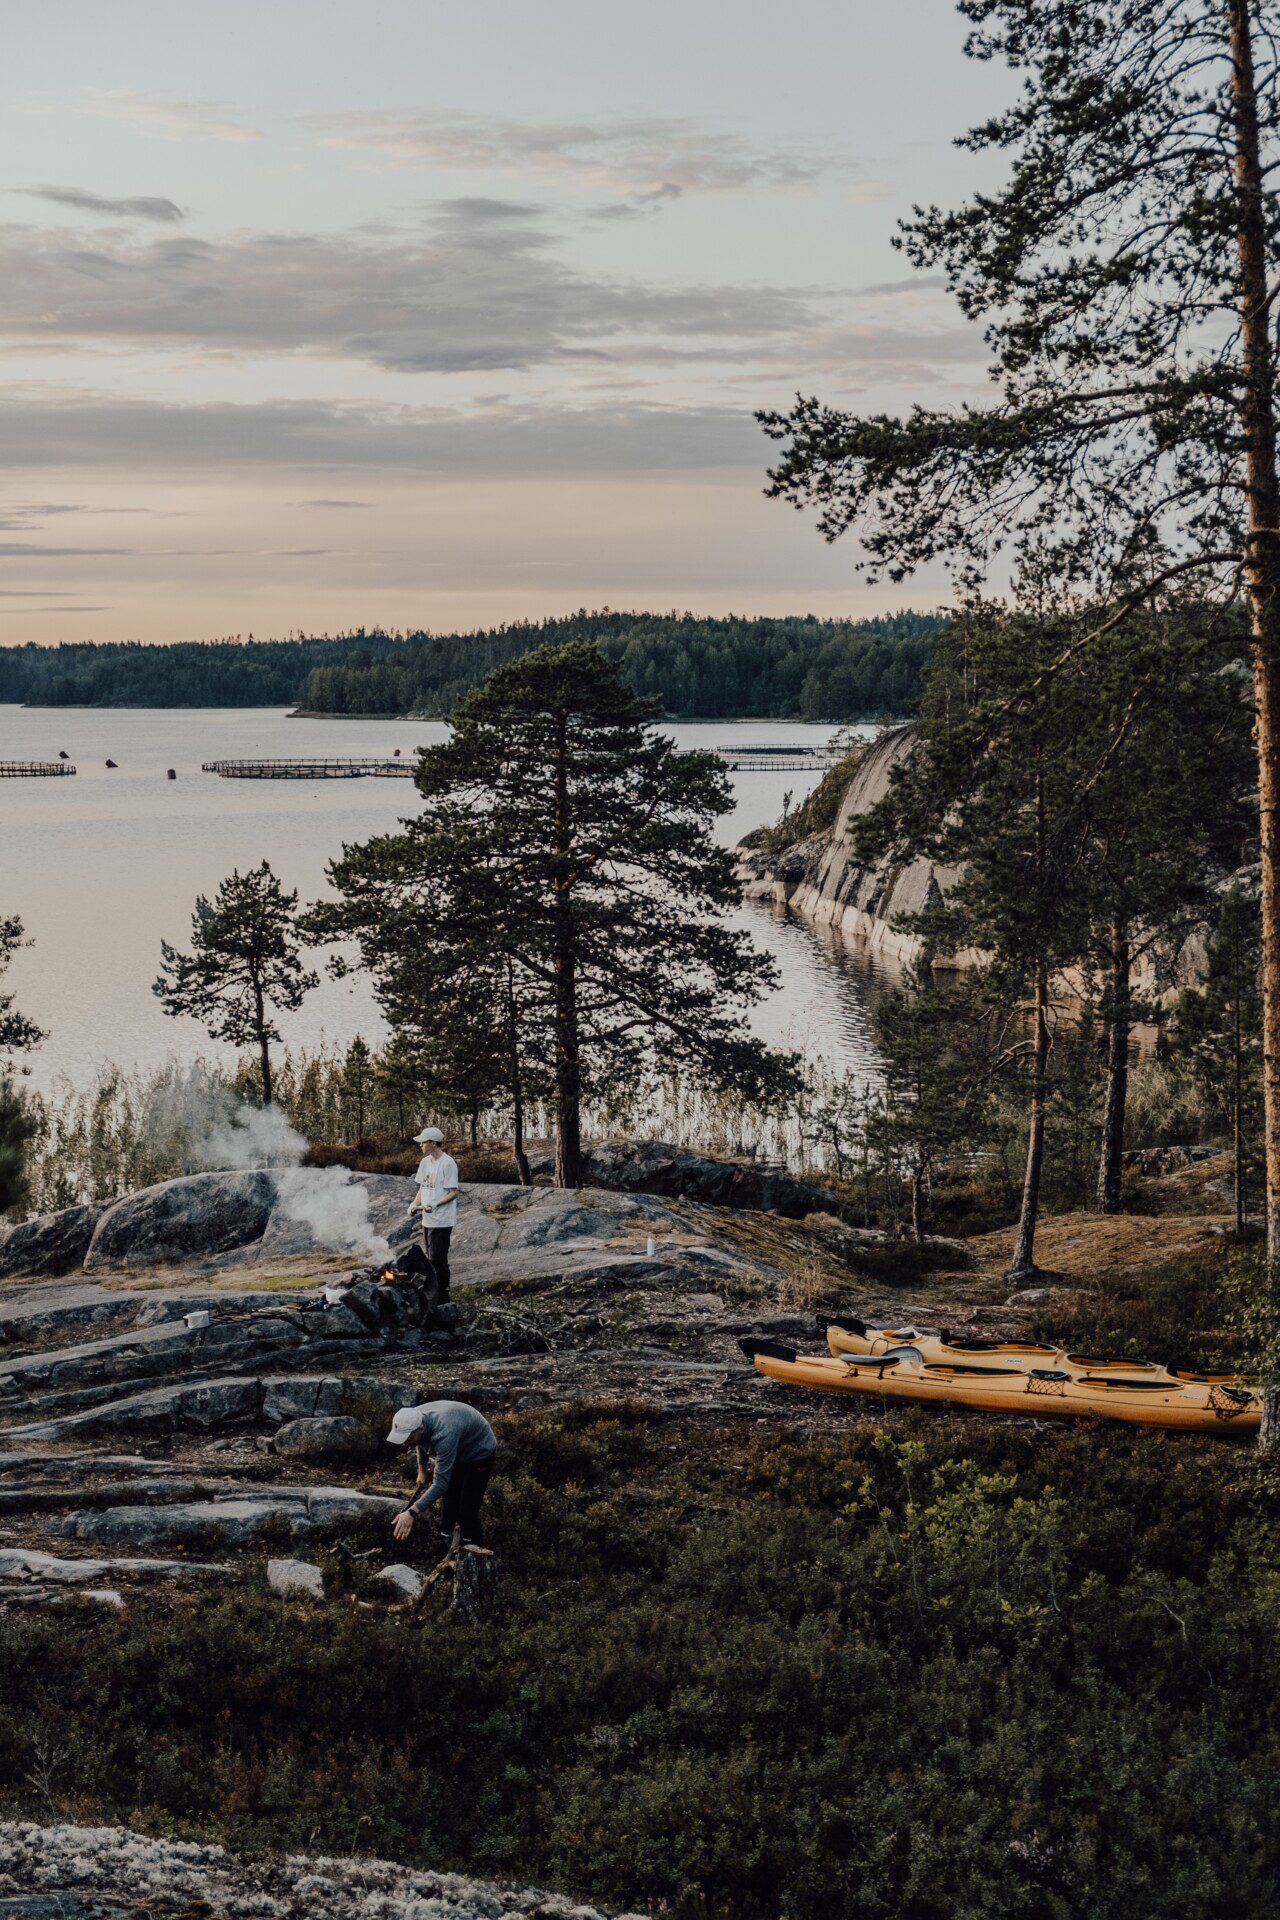 A photograph of the wilderness. There are mountains and a lake in the background. In the foreground are evergreen trees and rock. To the middle left is a person building a fire with smoke going up in the air. This photo is from pexels by alena beliaeva.